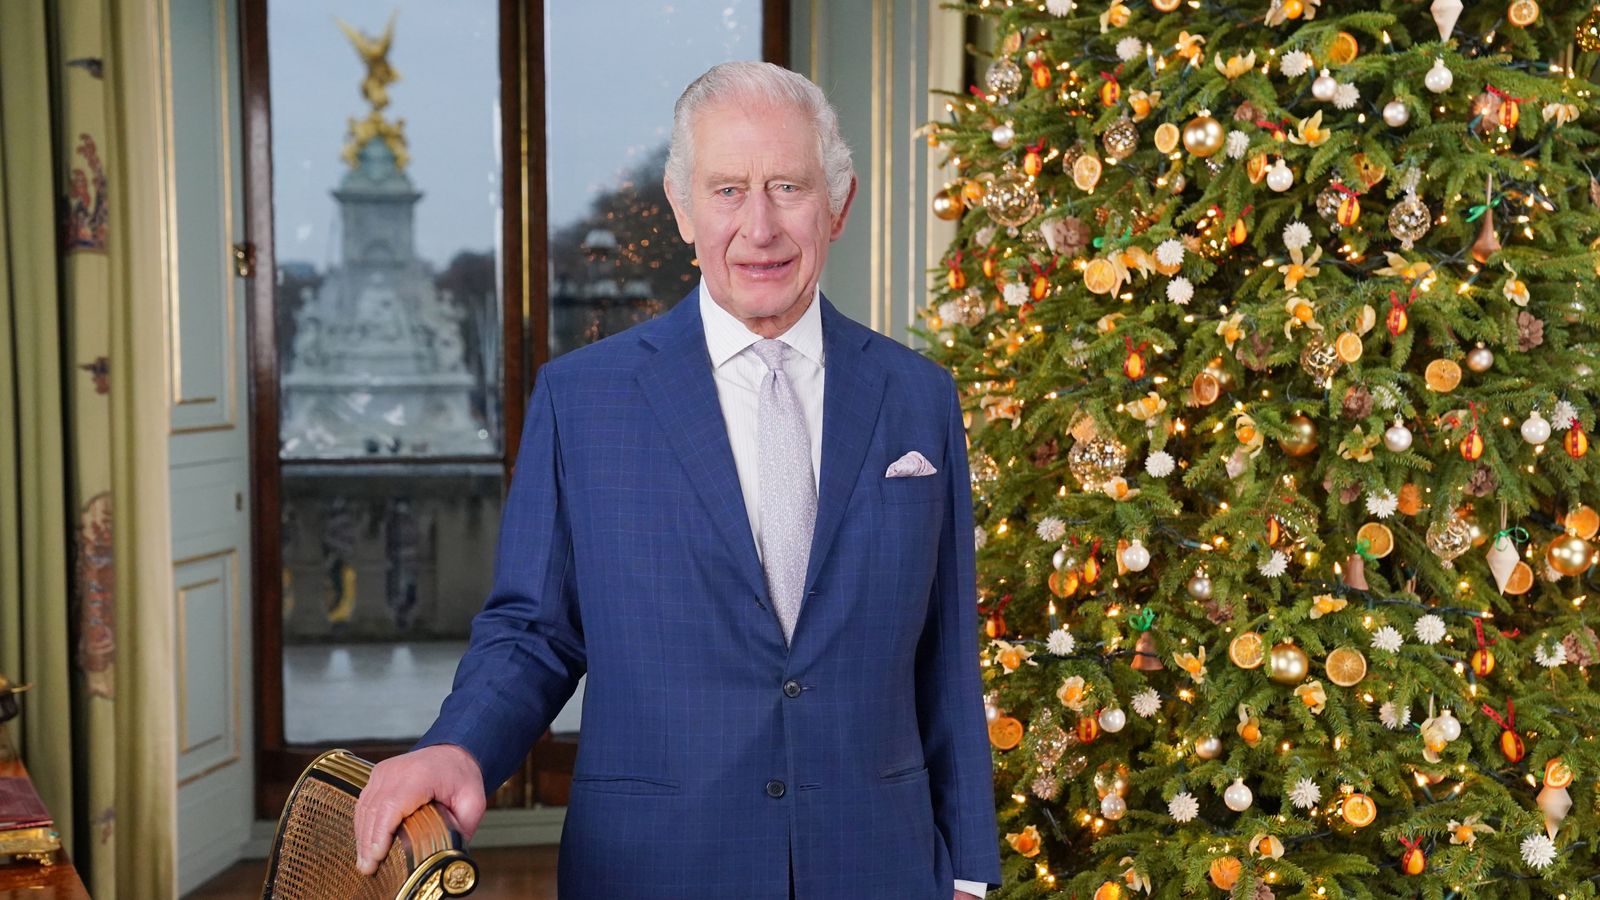 Picture released of King in room beside Buckingham Palace balcony ahead of Christmas message